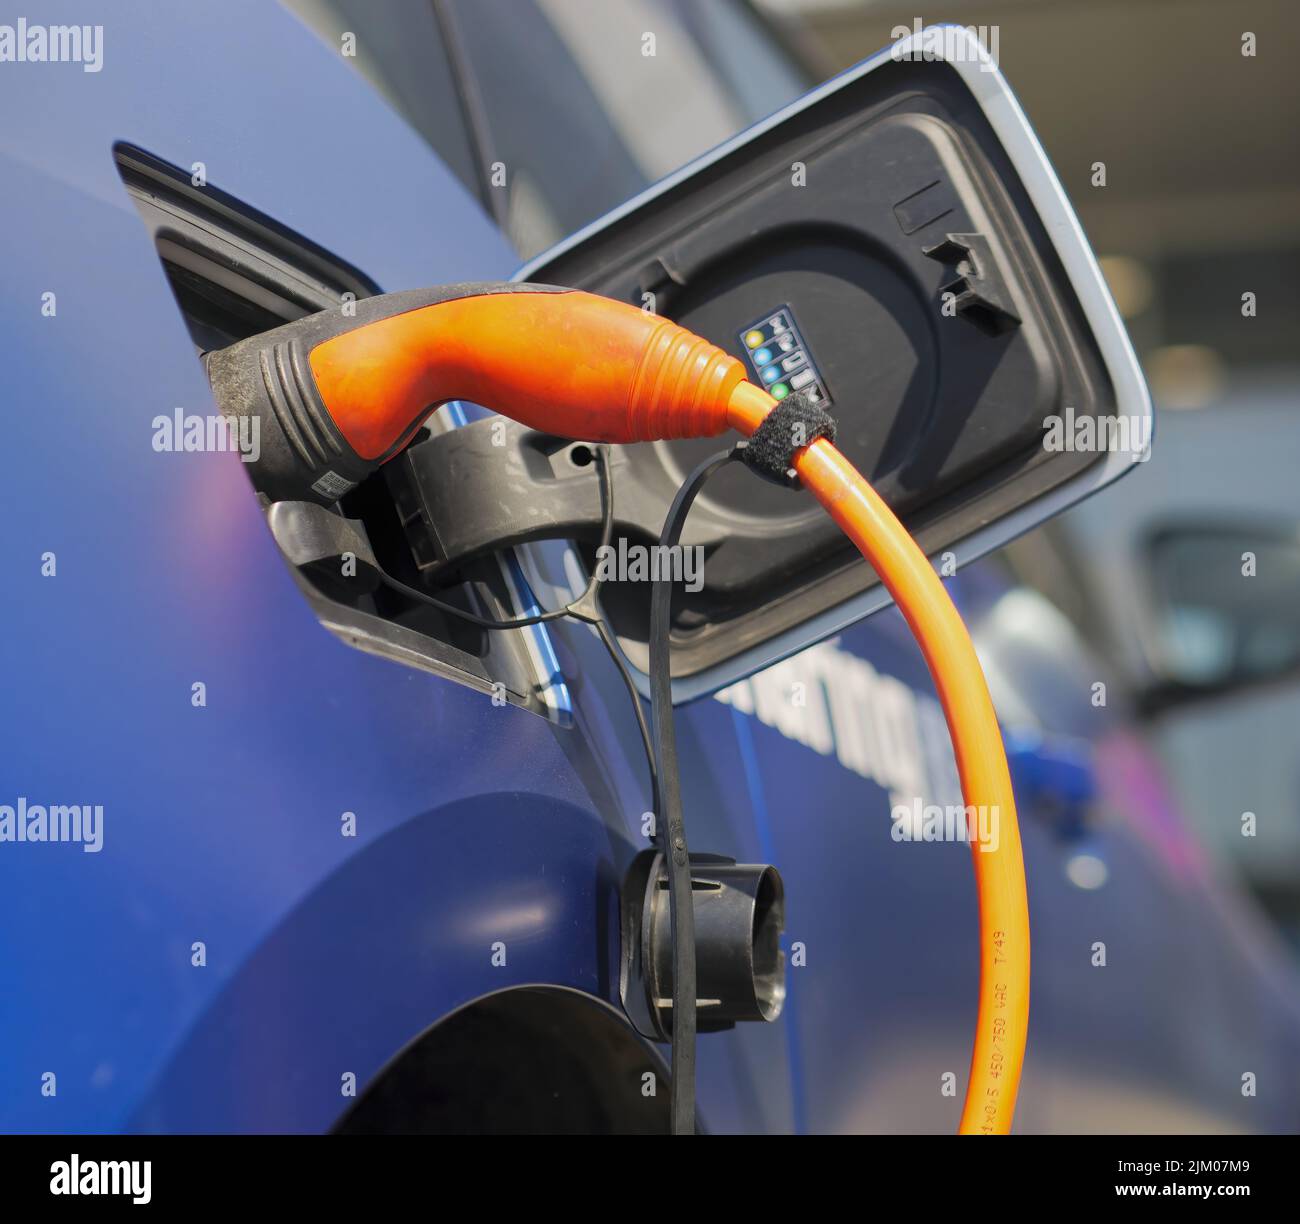 A closeup shot of an electric car being charged with an orange charger Stock Photo